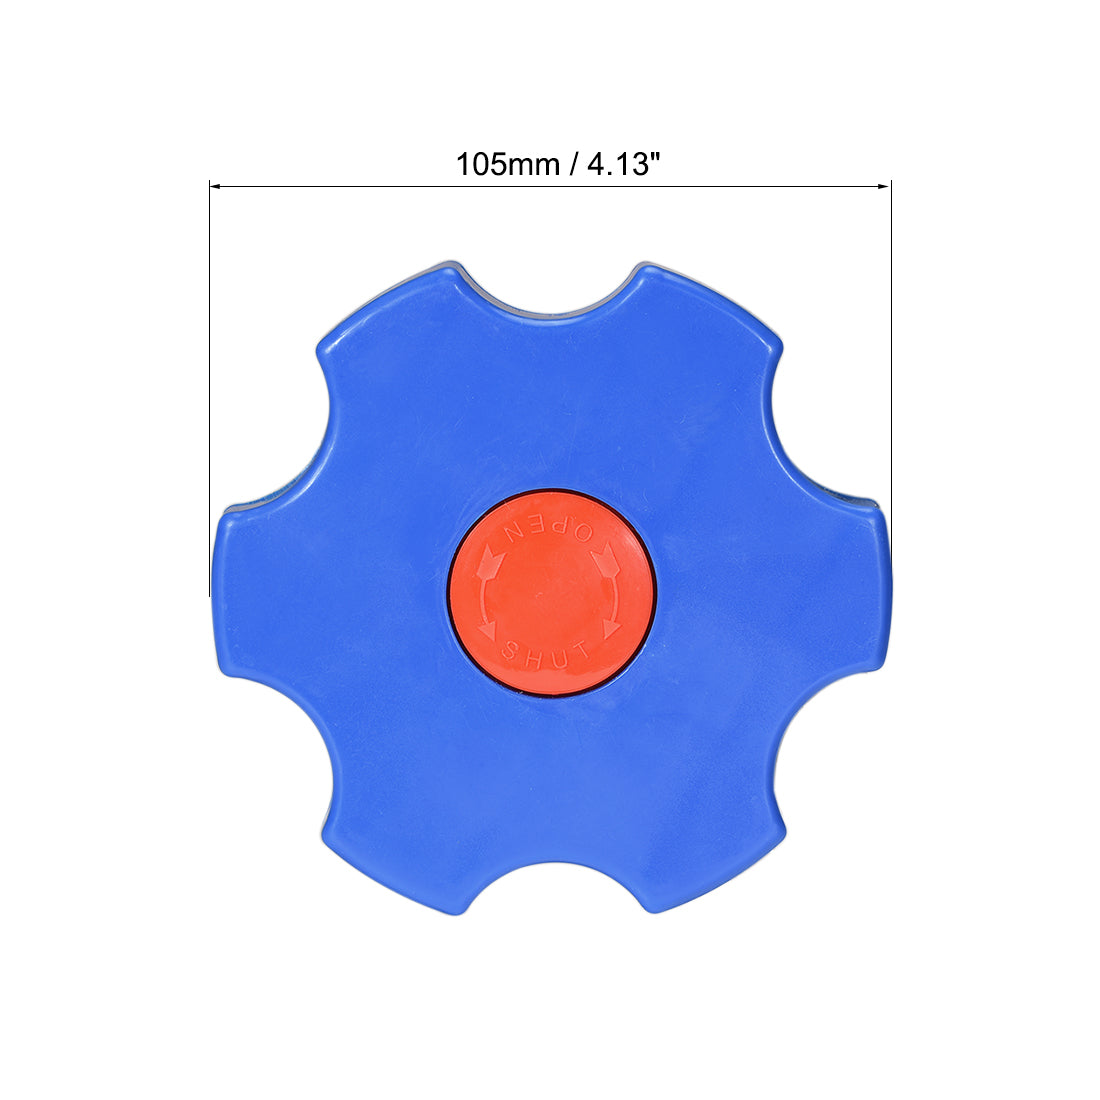 uxcell Uxcell Round Wheel Handle, Square Broach 9x9mm, Wheel OD 105mm ABS Blue Red 1Pcs